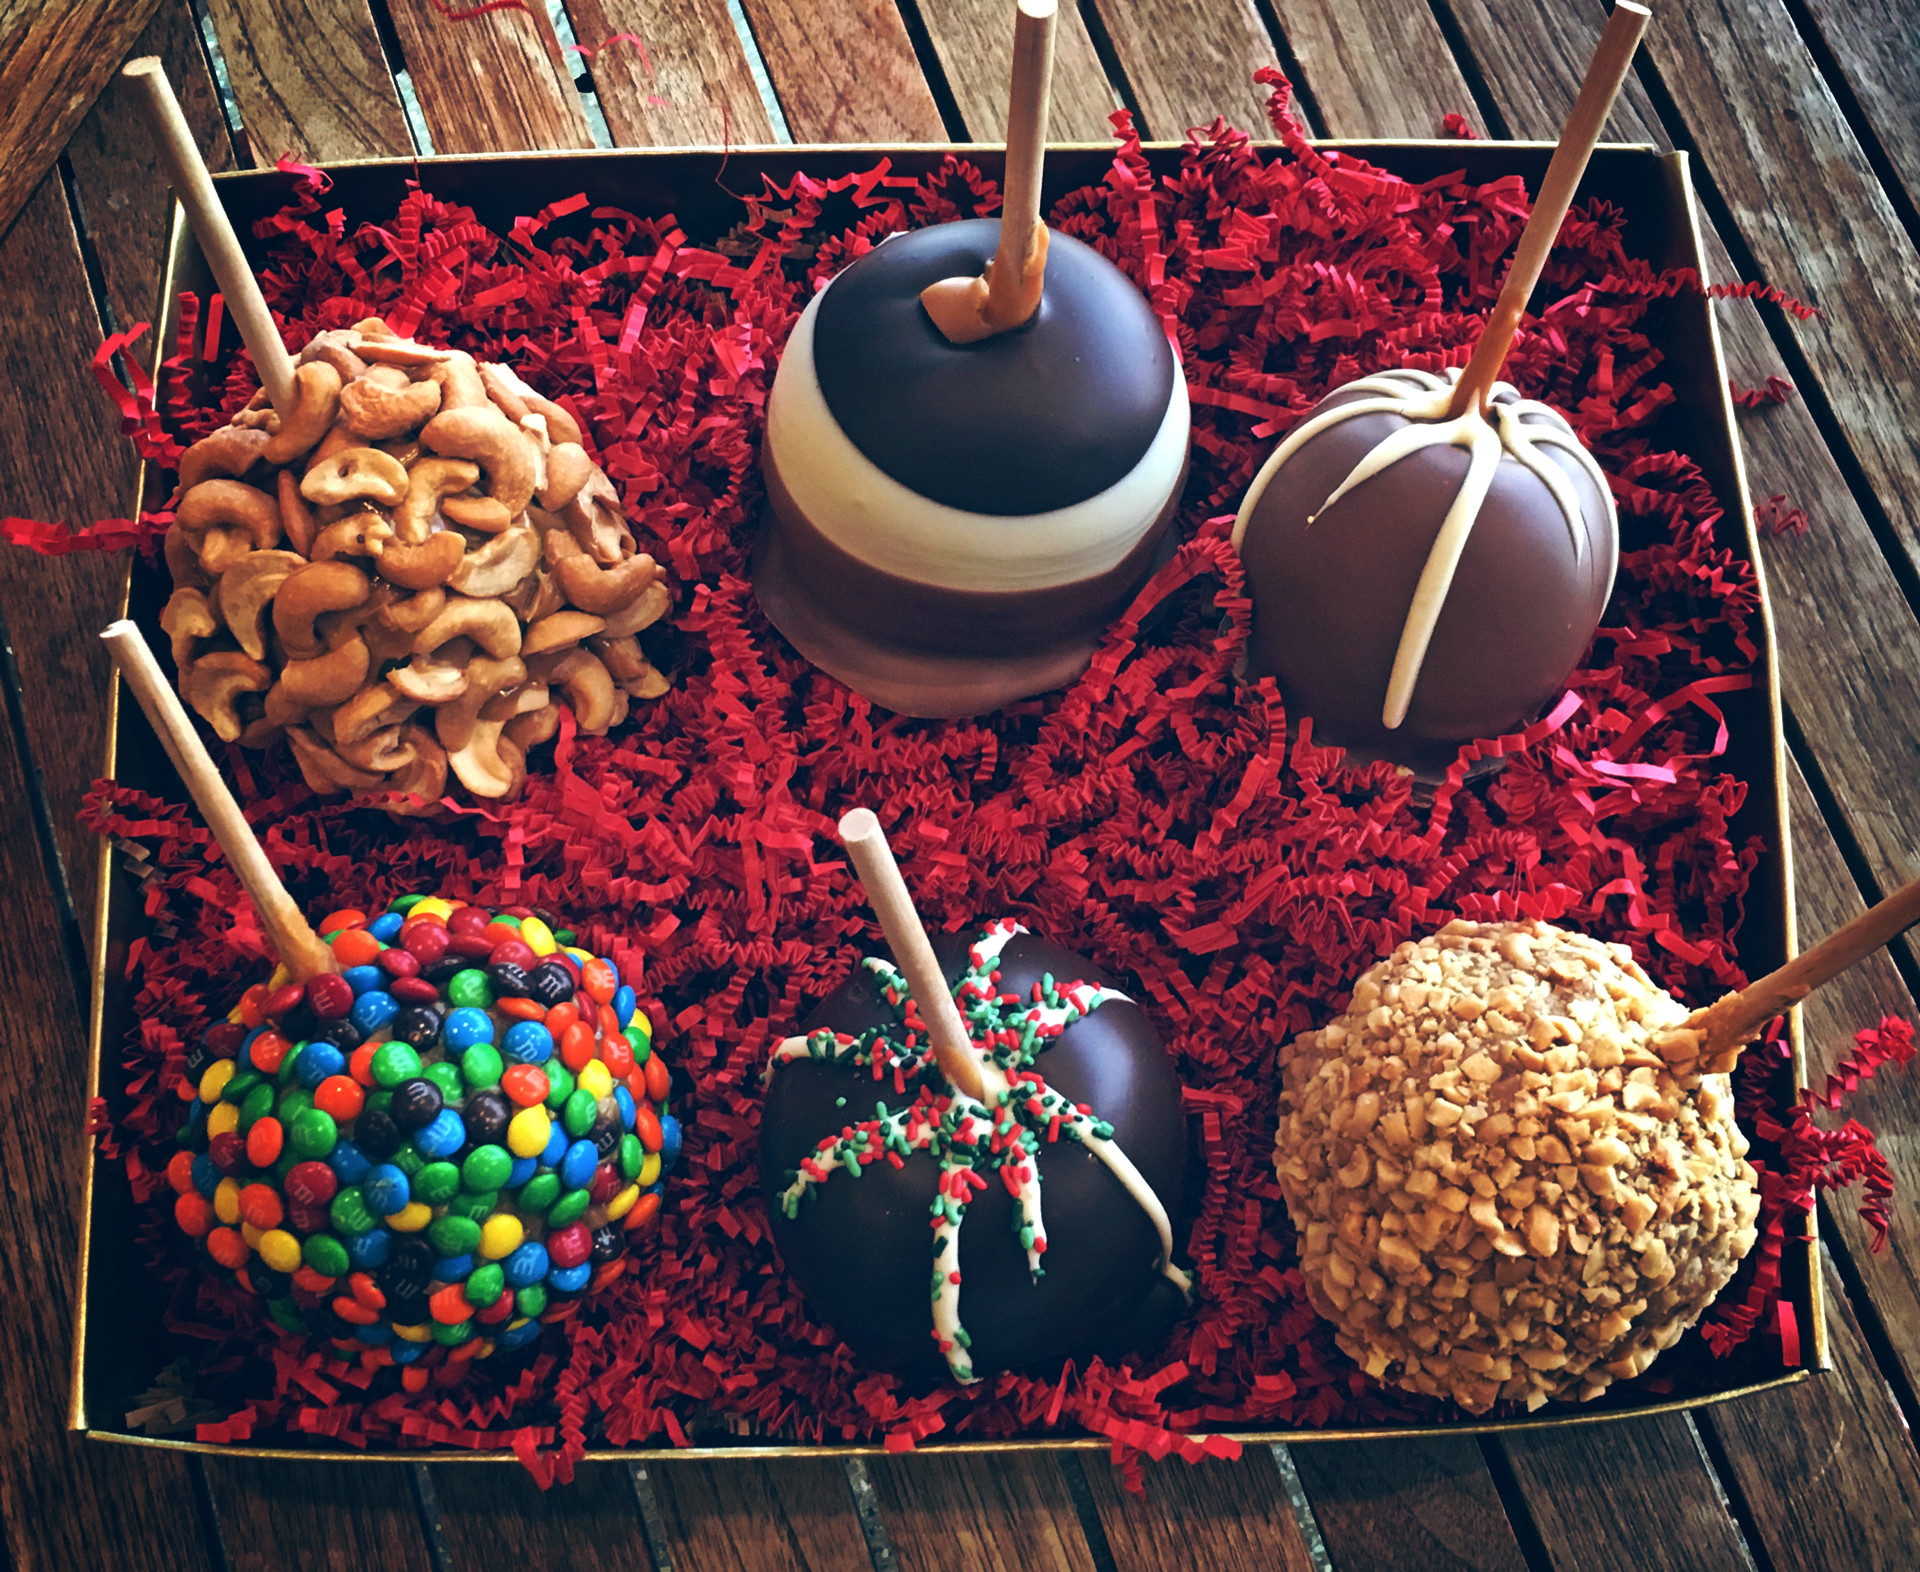 Gourmet Chocolate Caramel Apples
 30 Ideas for Gourmet Caramel Apples Delivered Best Round